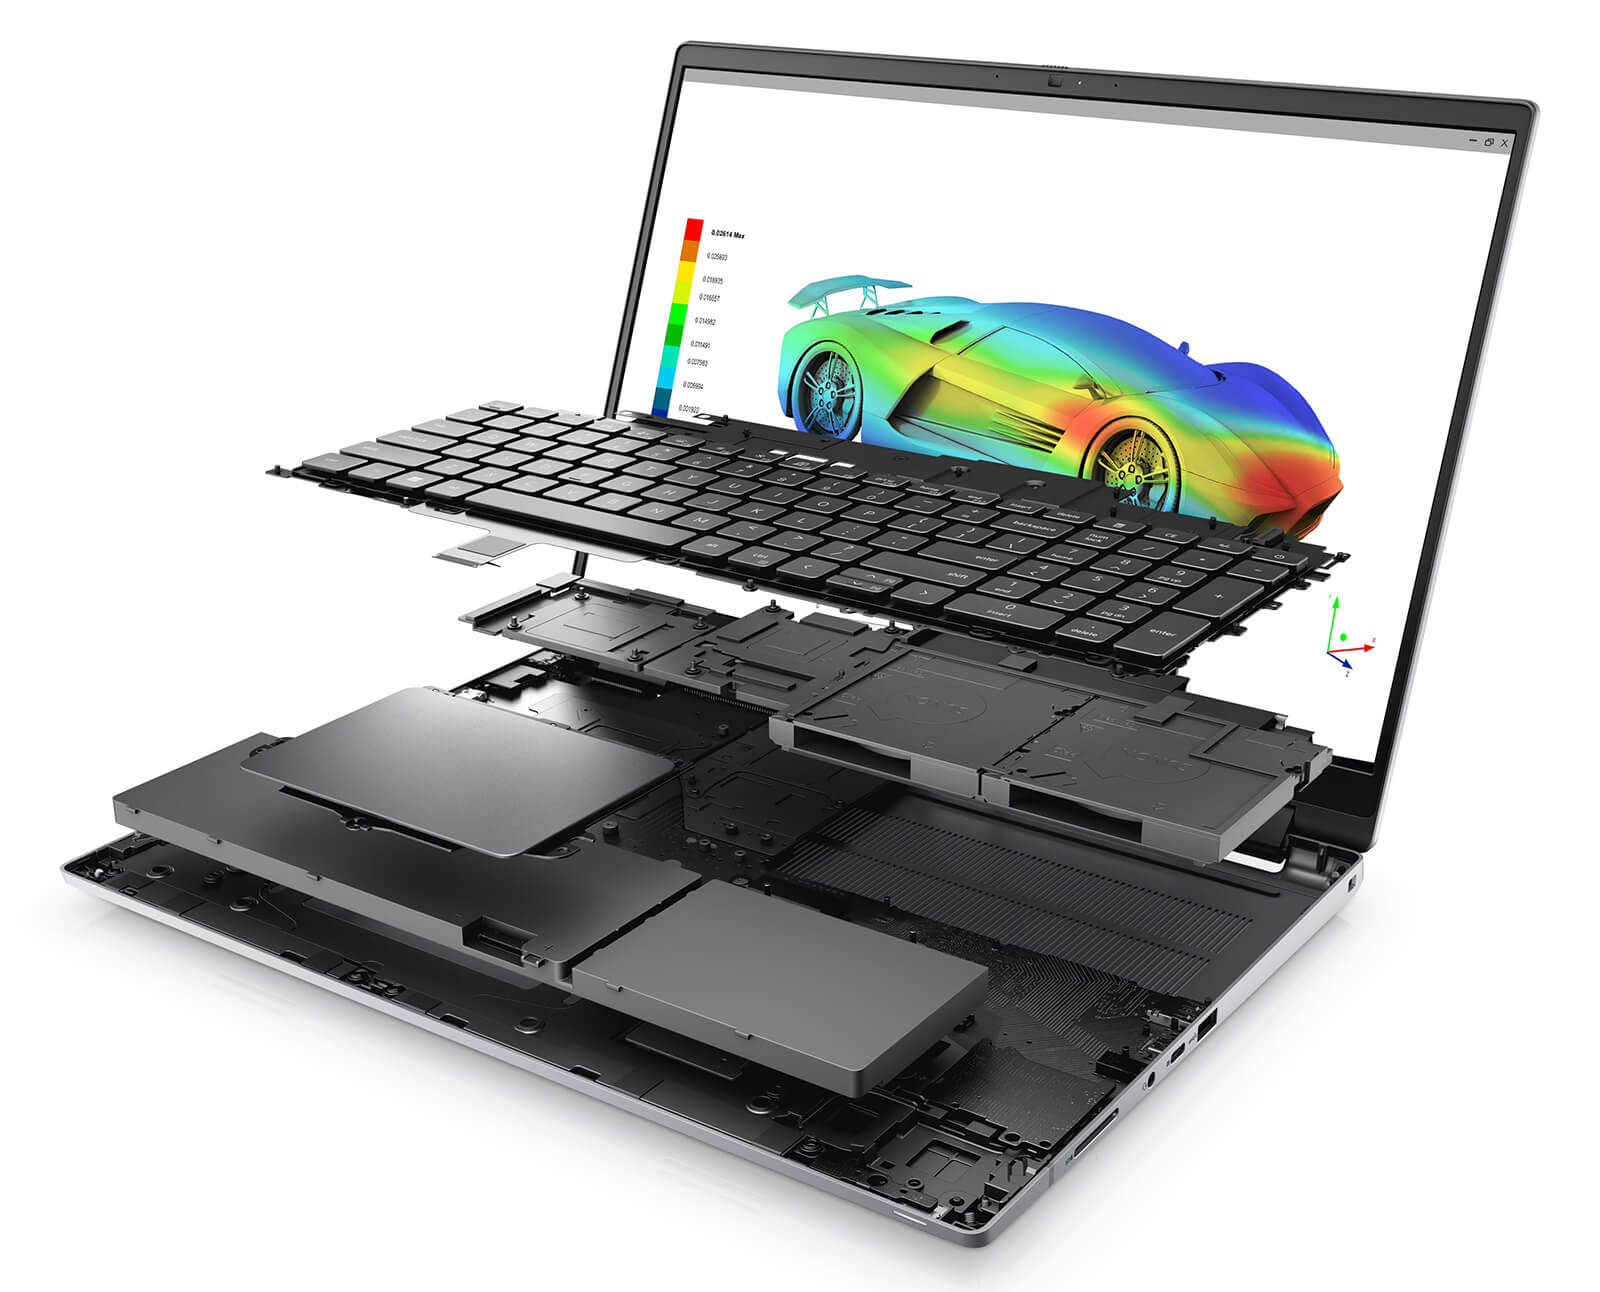 Dell Precision 7670 Mobile Workstation (2022) Features 06